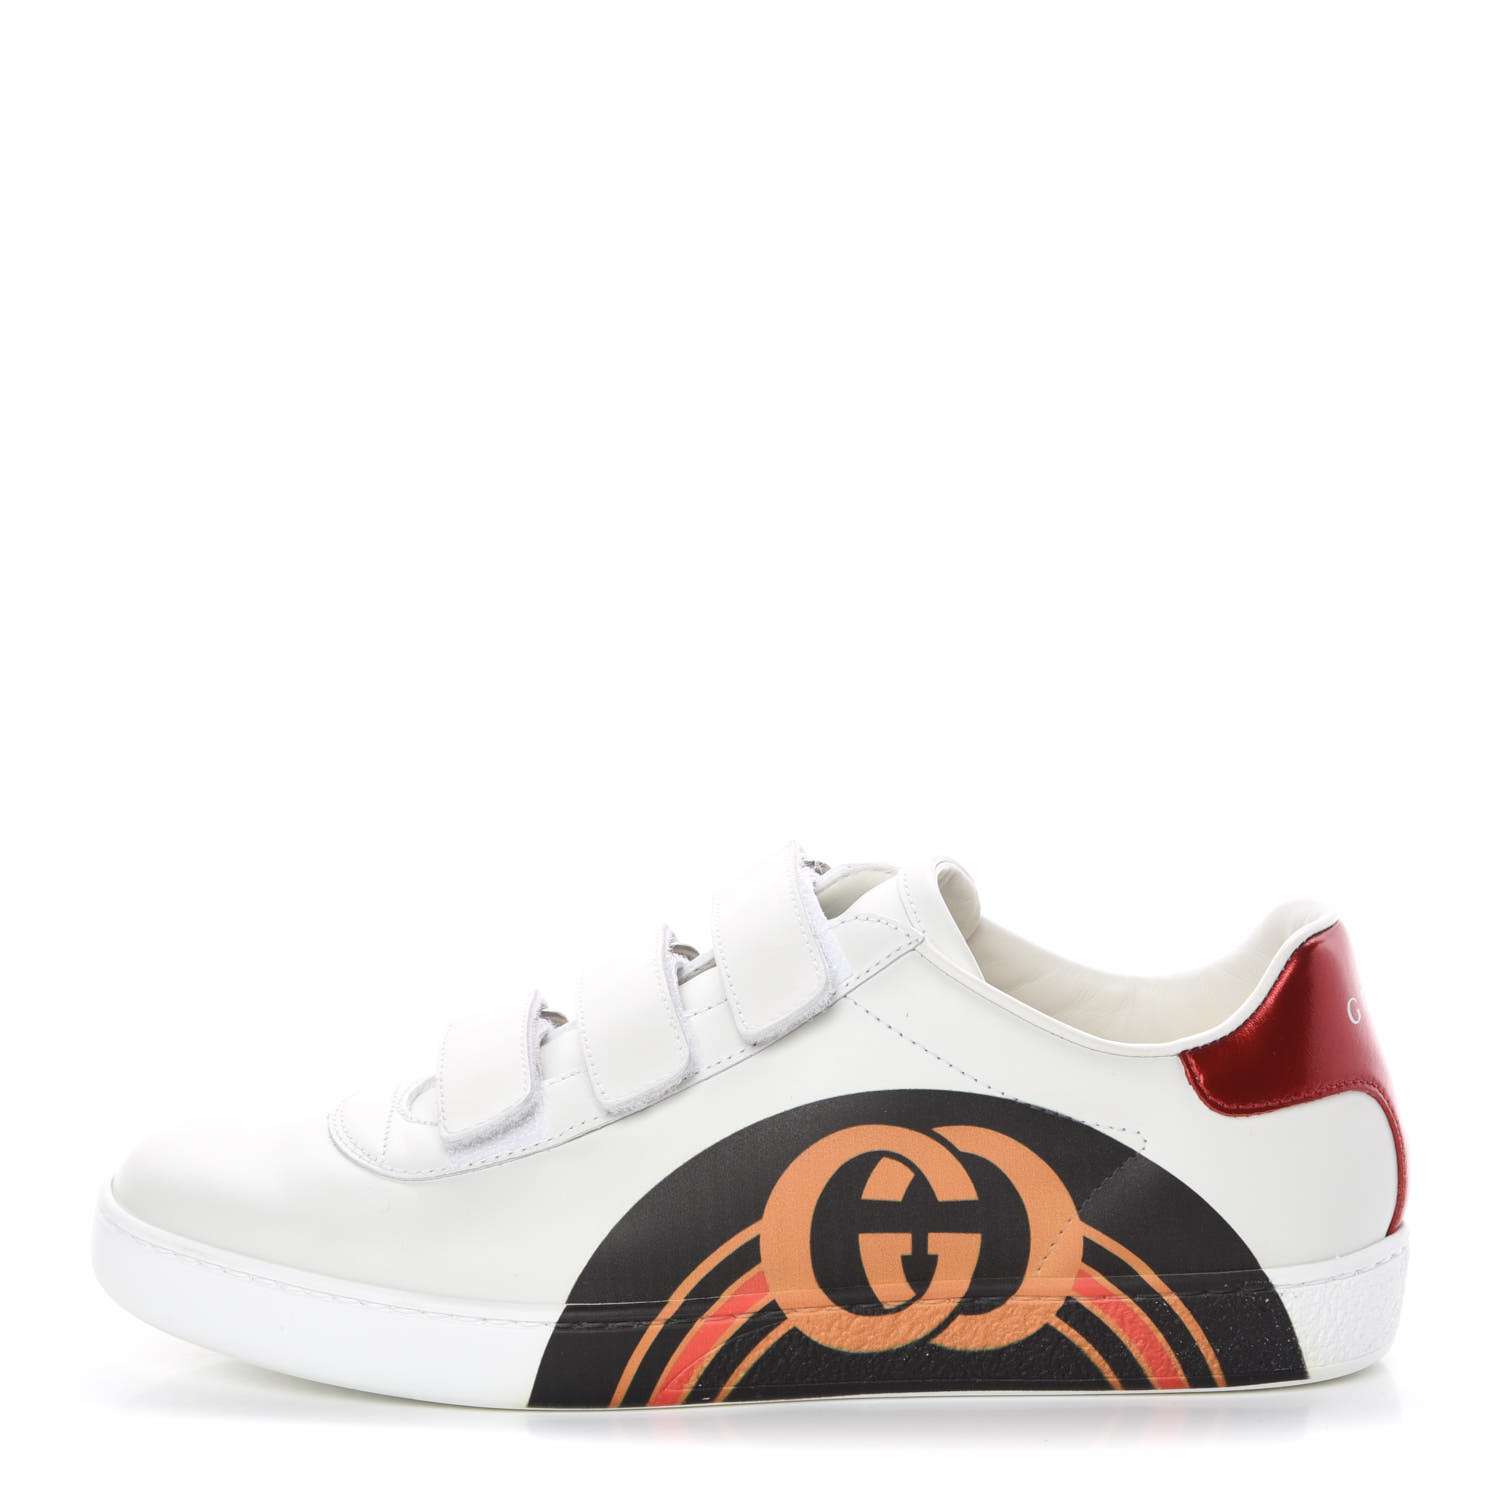 gucci velcro ace sneakers